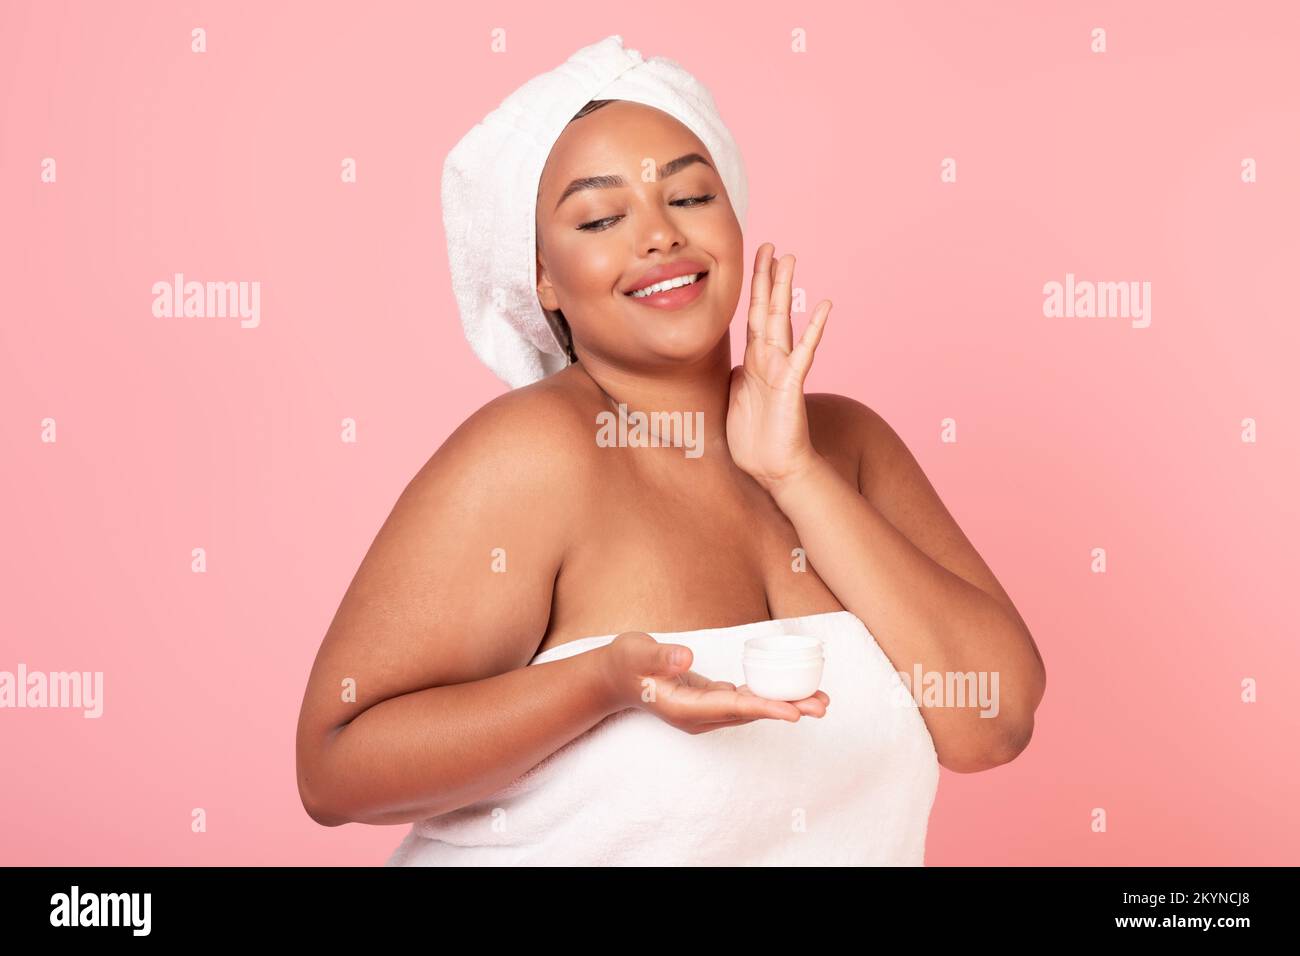 Skin care concept. Happy black oversize lady with towel on head applying moisturizing face cream, pink background Stock Photo